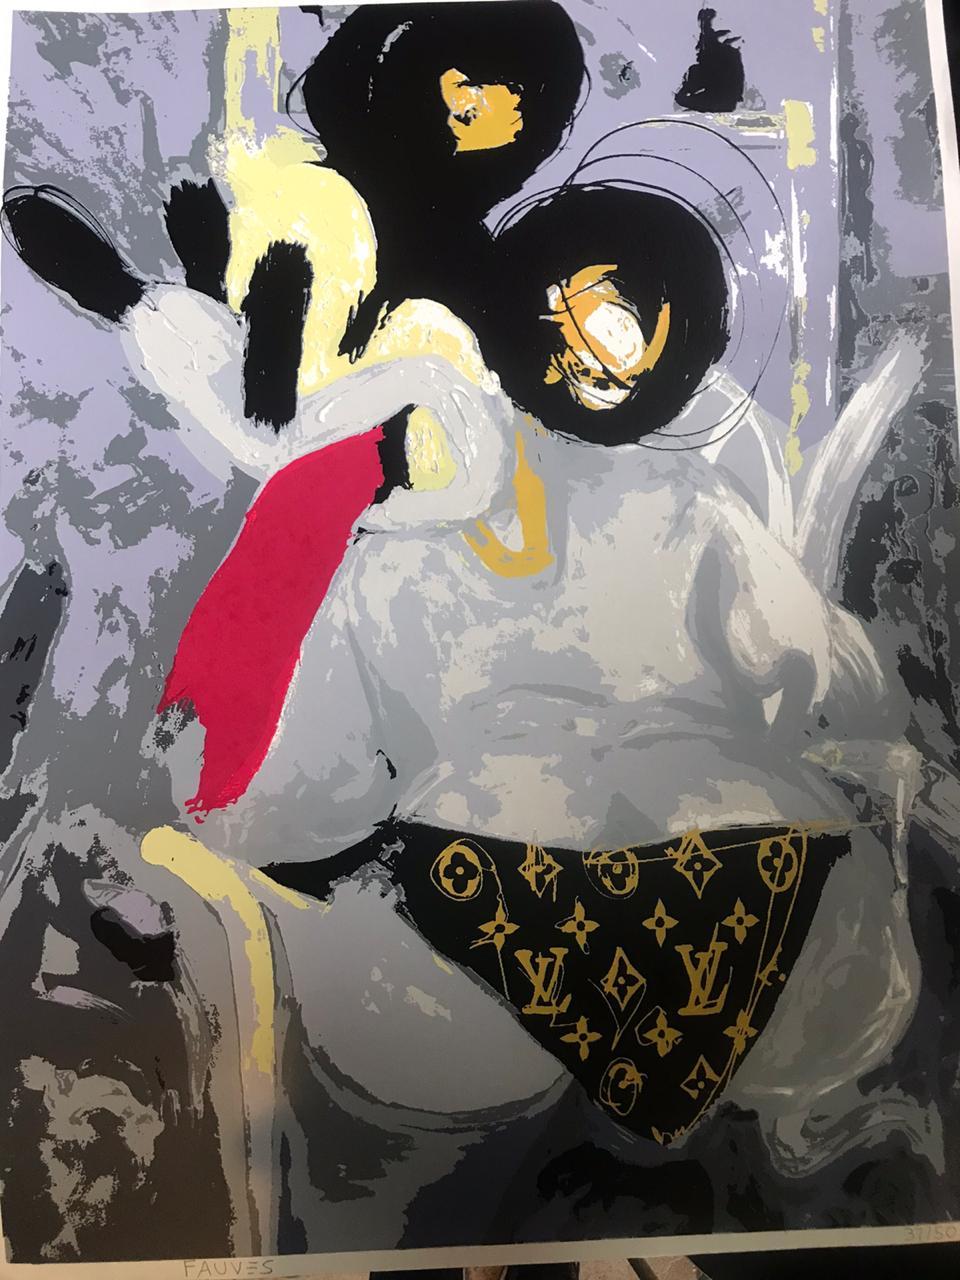 "Mickey under Louis" Silkscreen Print 39"x28" in Ed. 37/50 by John Paul Fauves 



ABOUT John Paul FAUVES: 
John Paul Fauves (born in 1980) is a contemporary Artist from Costa Rica . His artistic journey started at a very young age after he became a